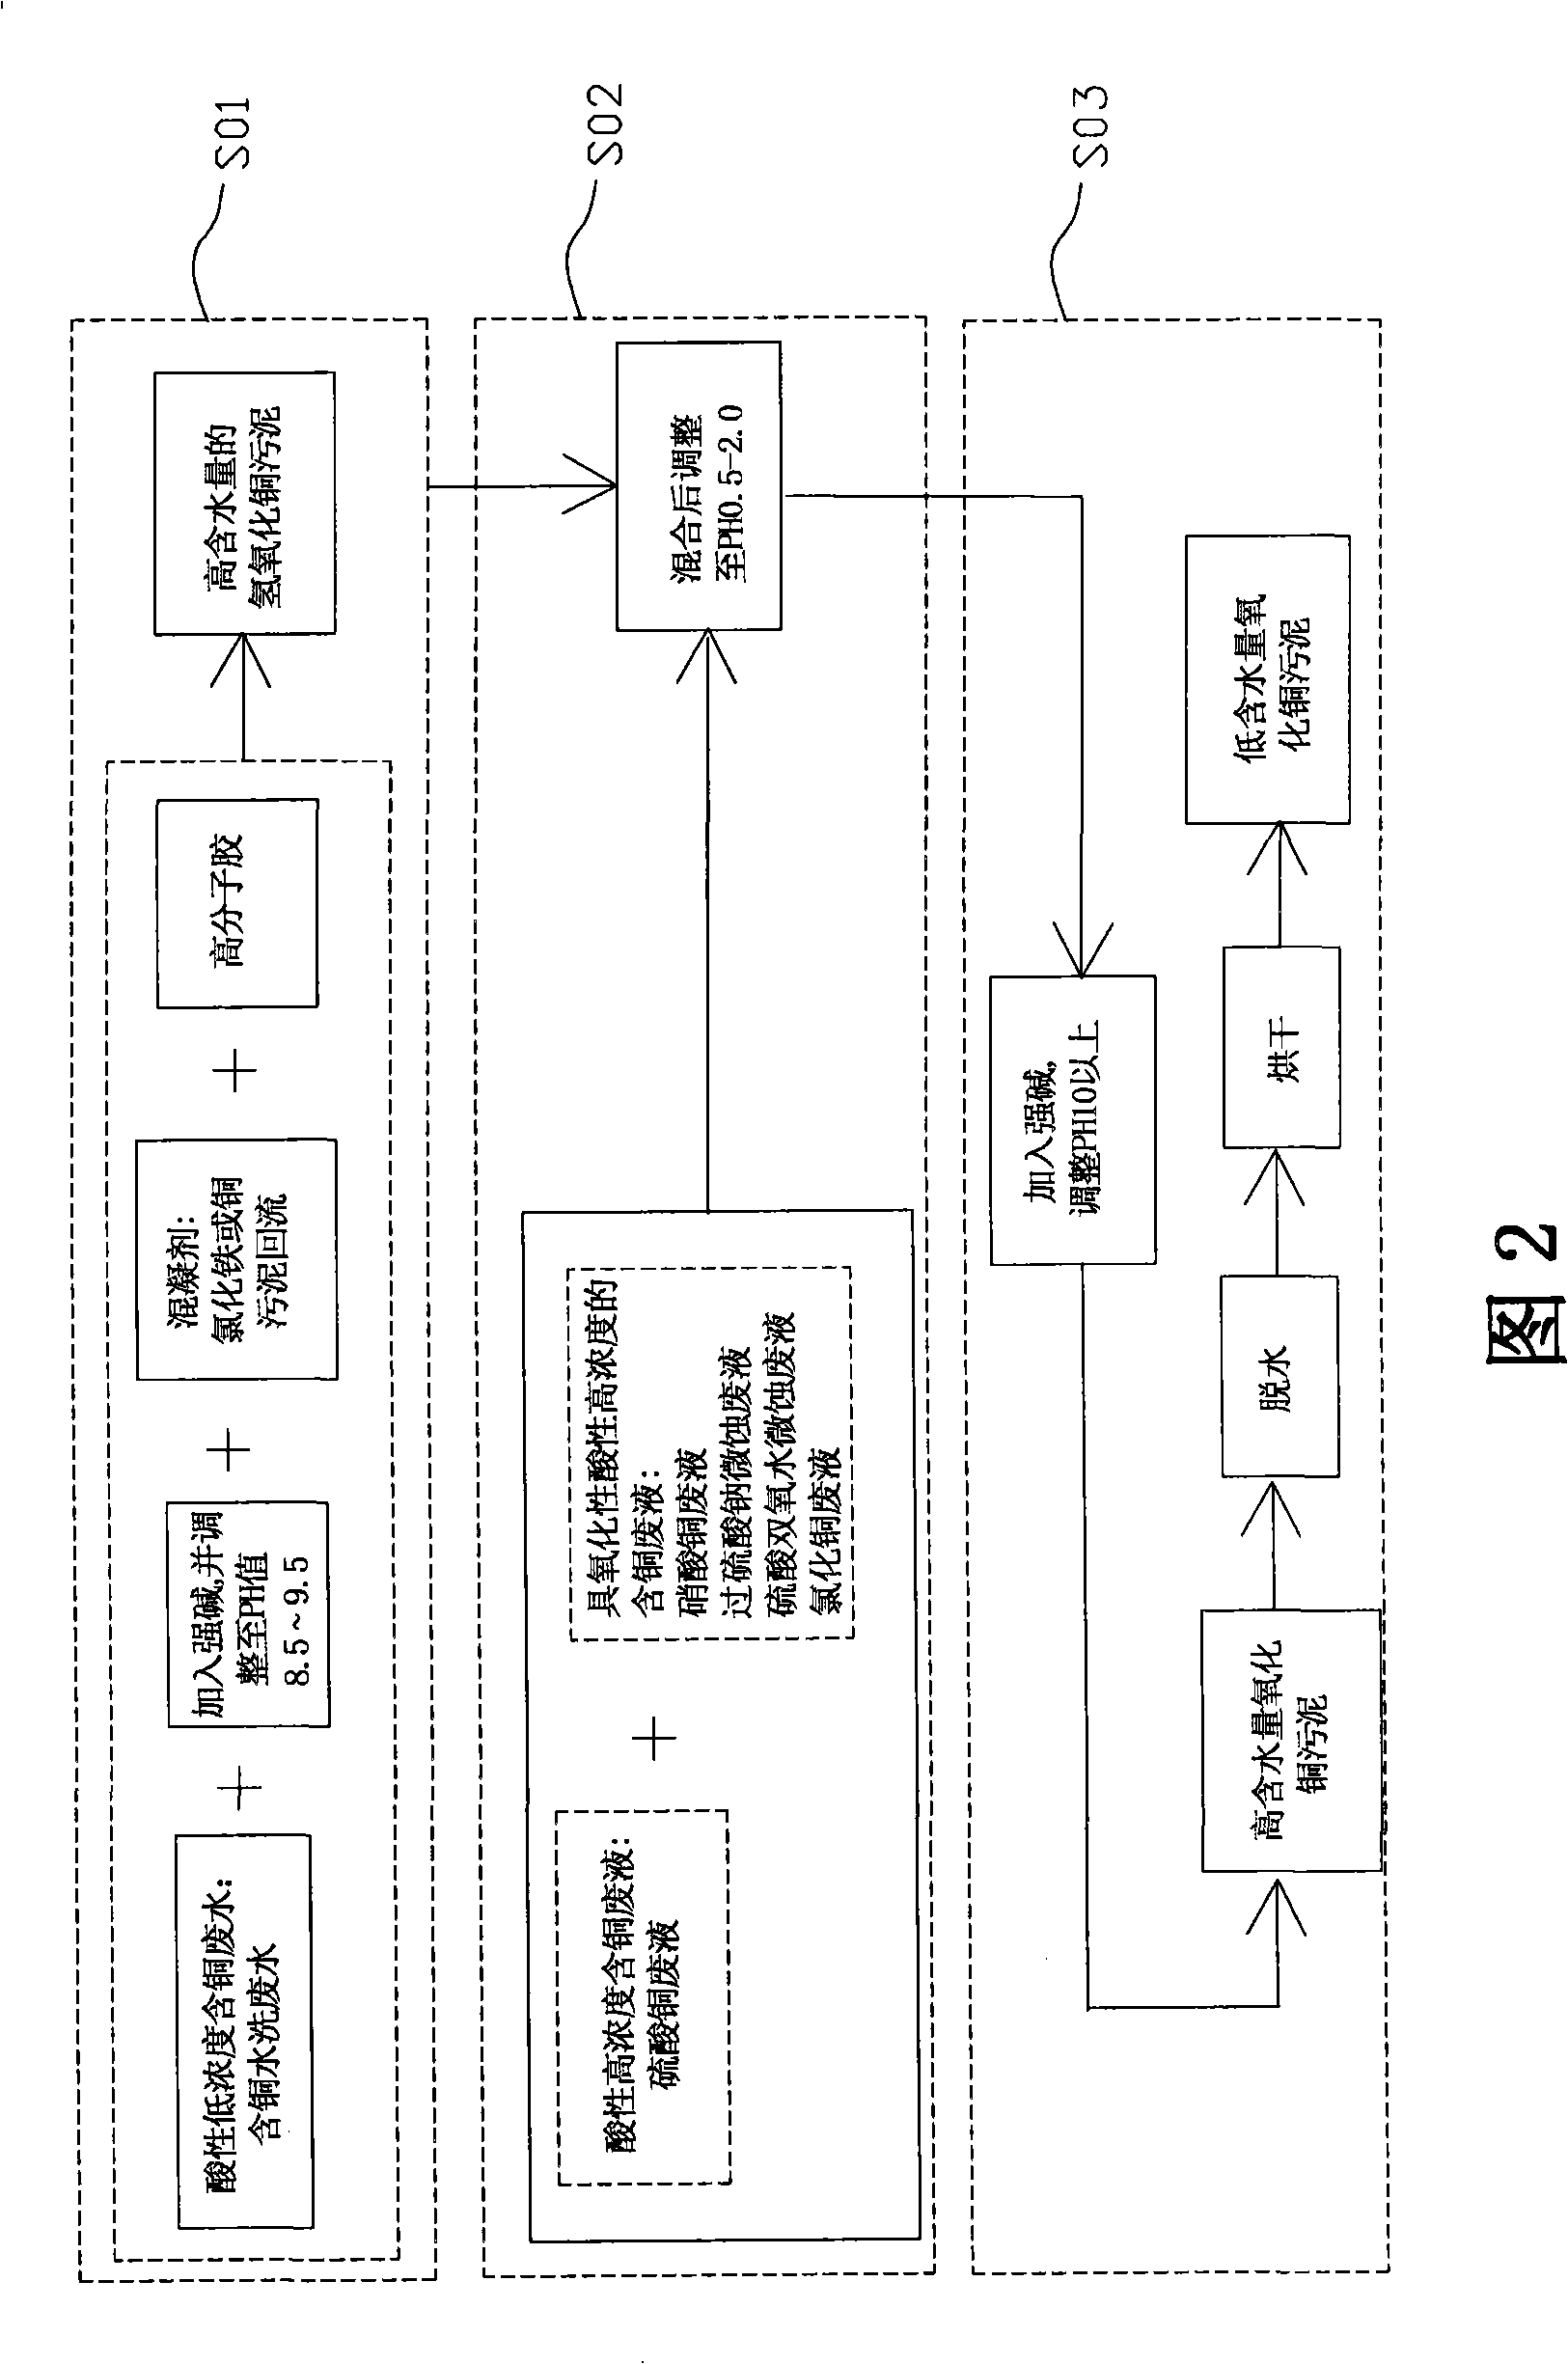 Processing method for generating highly copper containing sewage sludge with copper containing wastewater or waste liquor